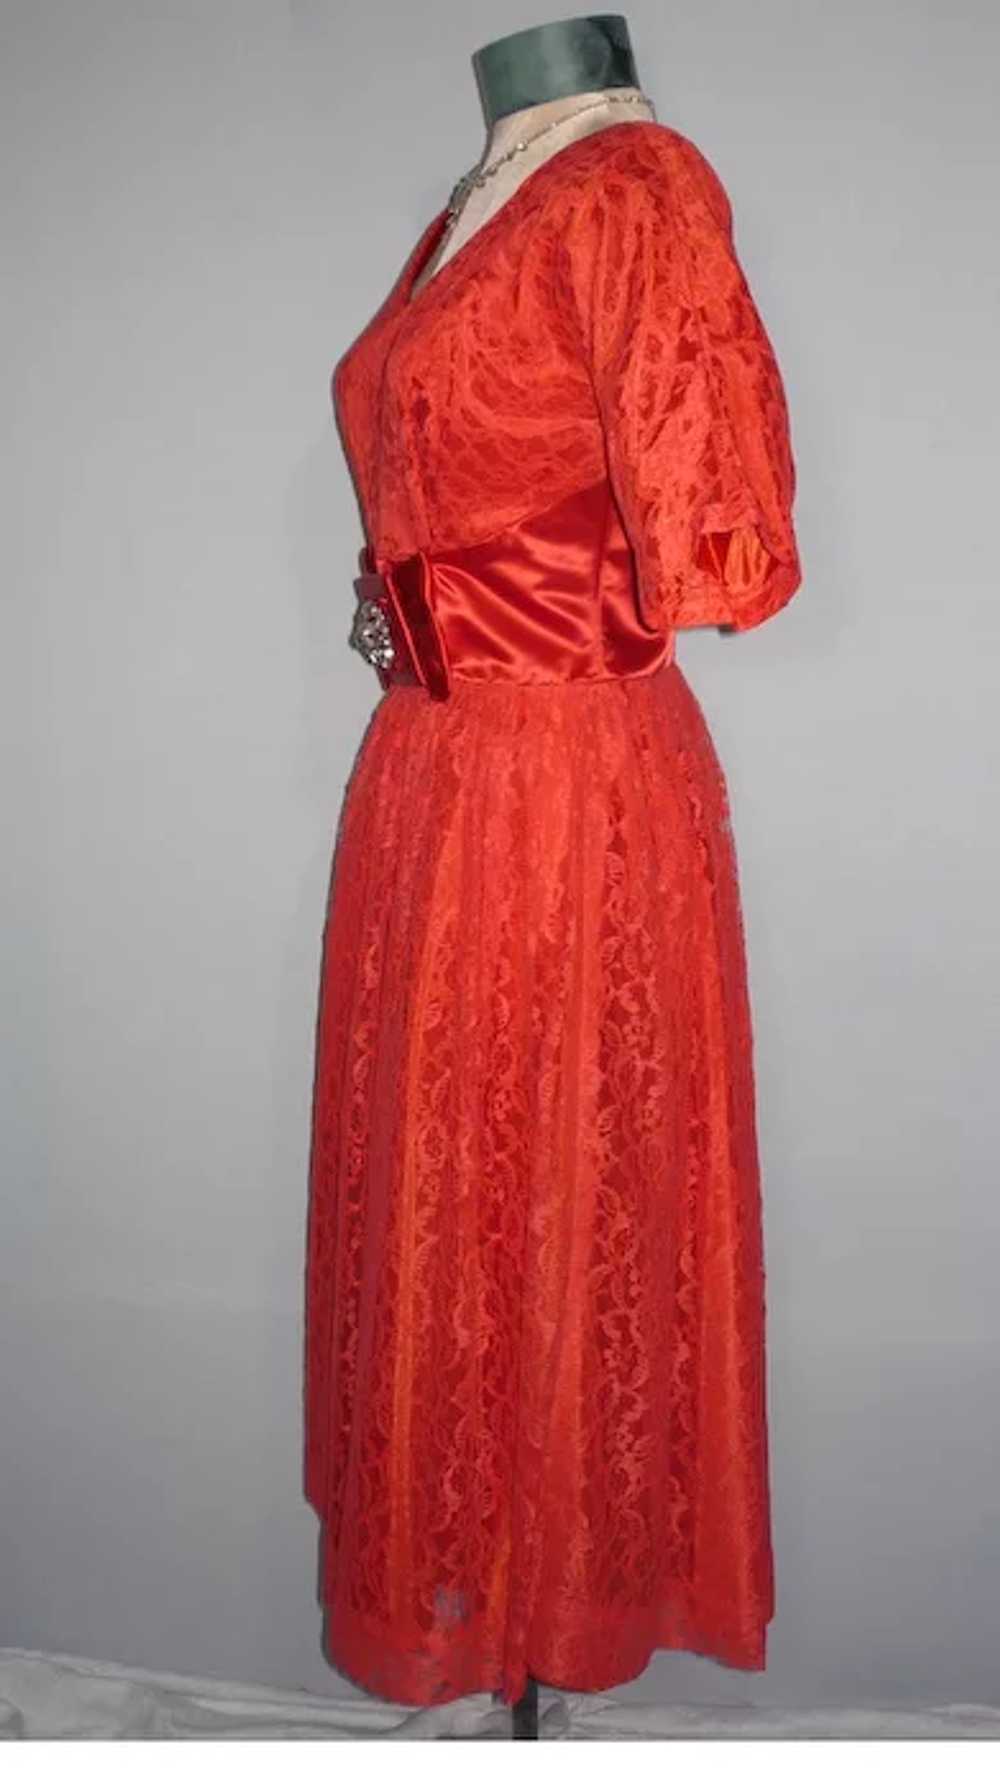 Vintage 1950s Red Chantilly Lace Party Dress - image 2